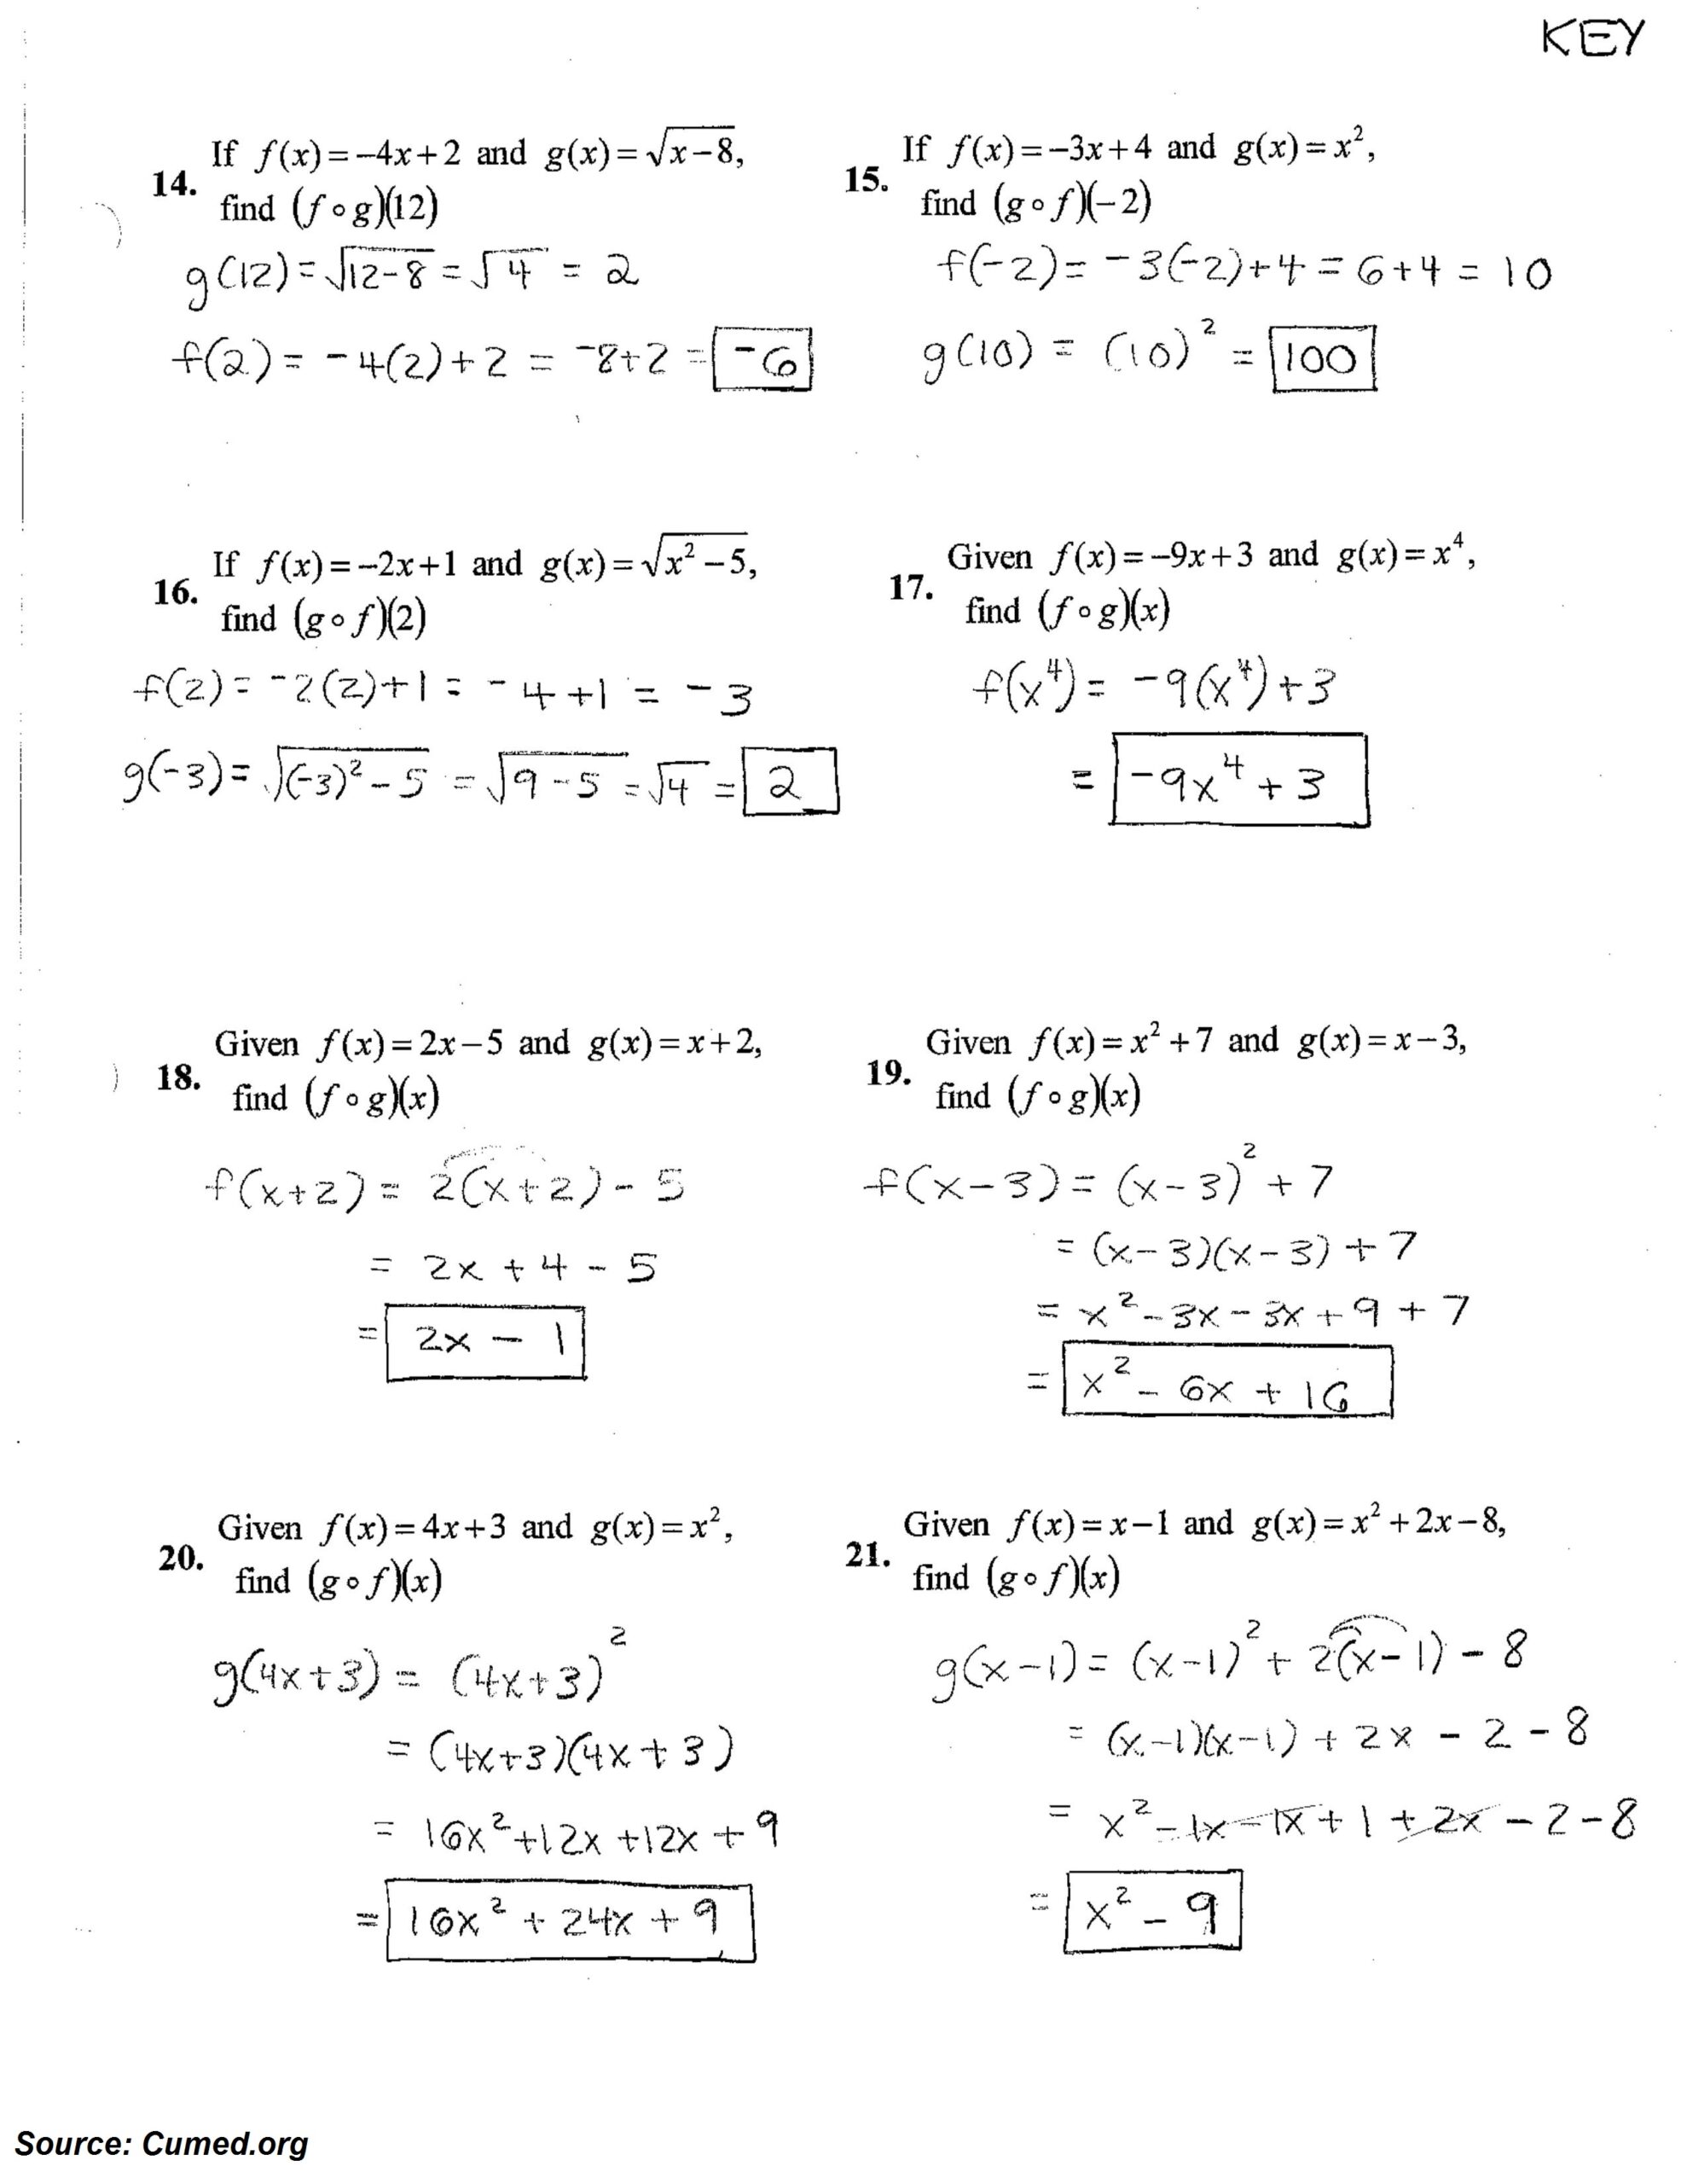 Composite Function Worksheet Answers